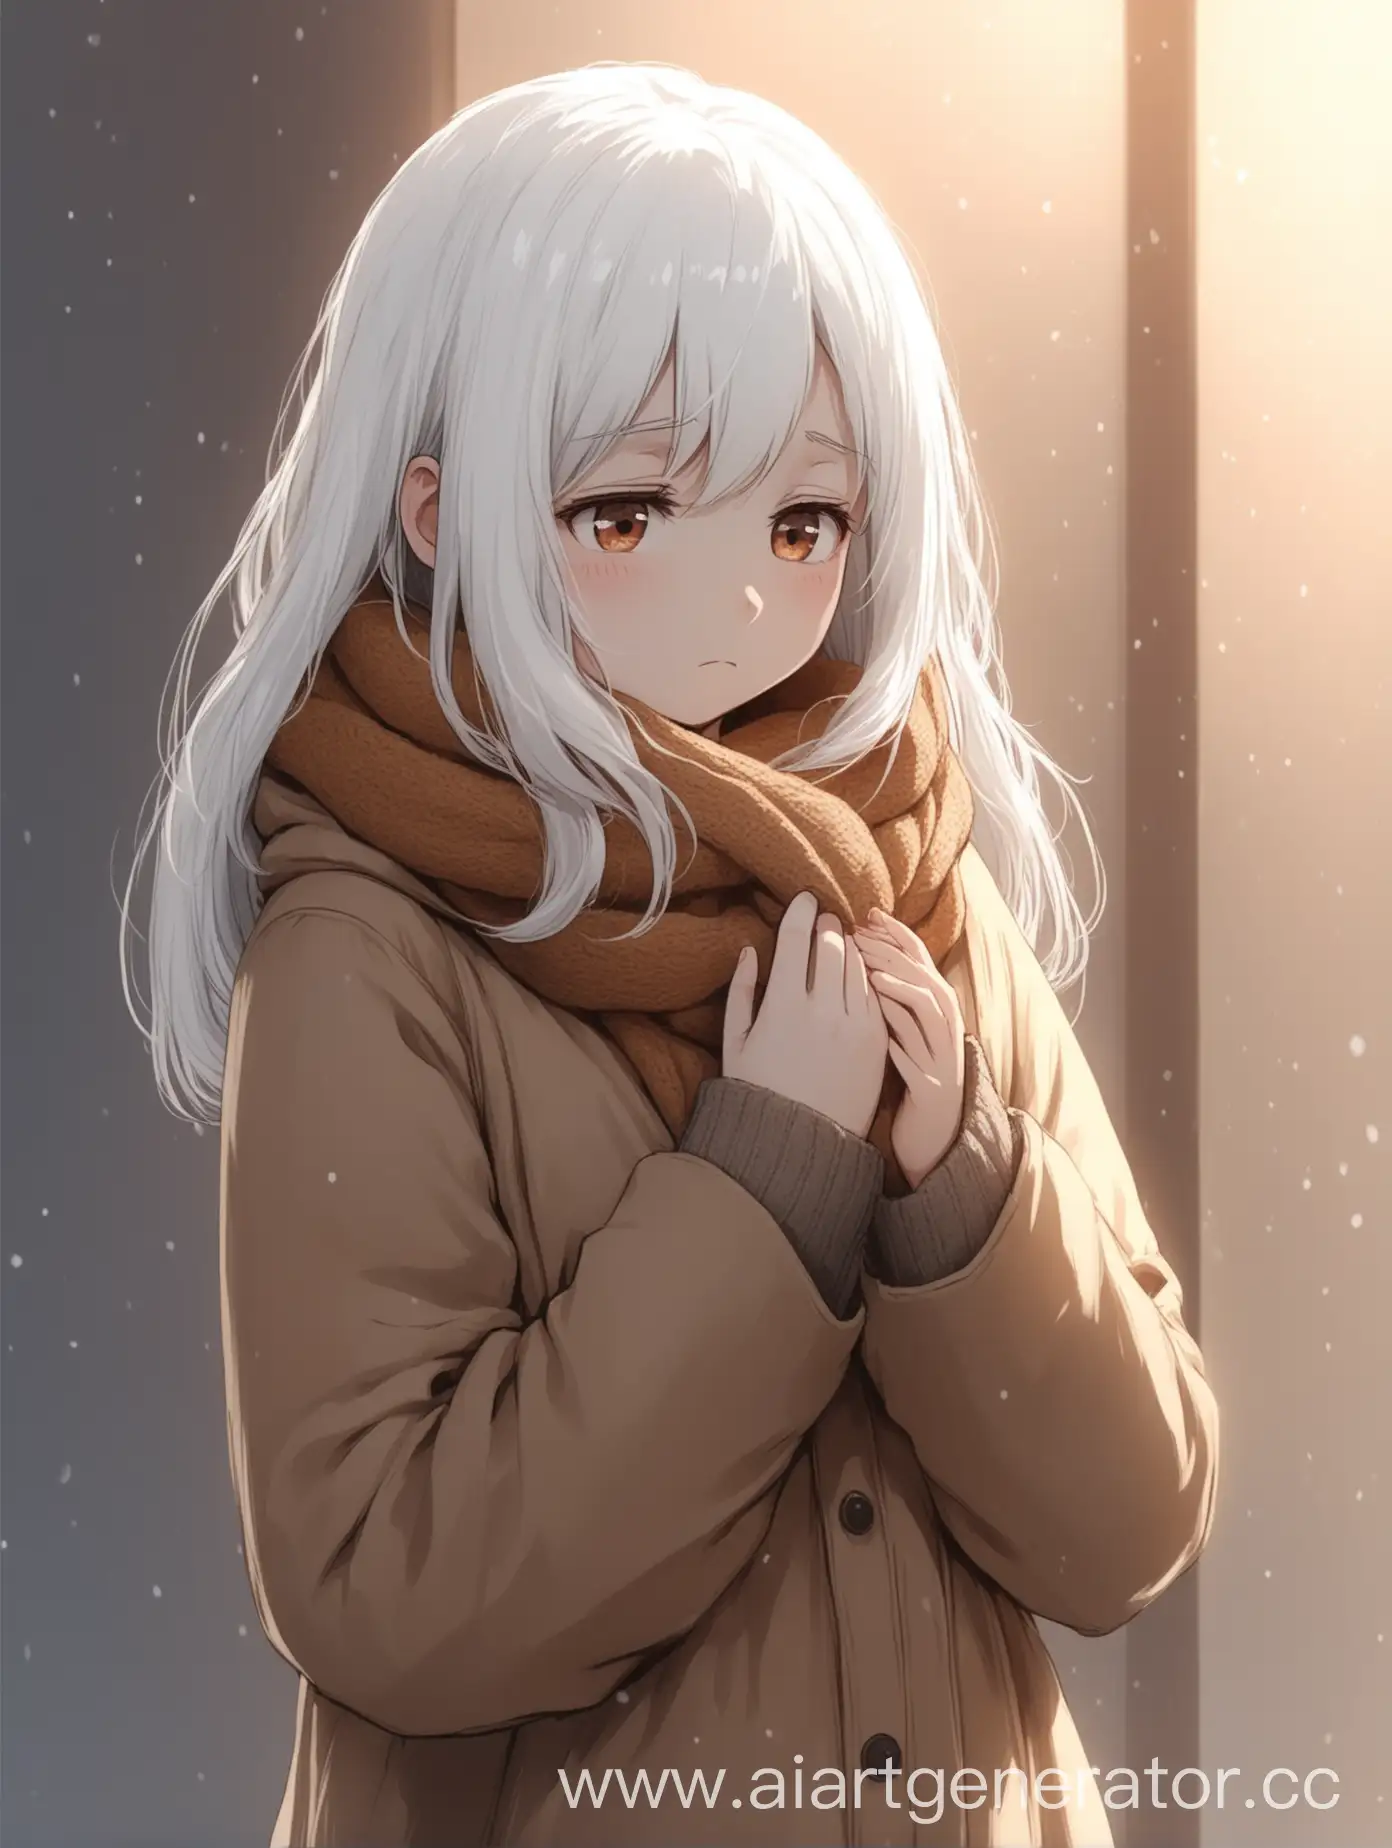 A girl with white hair and warm clothes stands very shyly with

